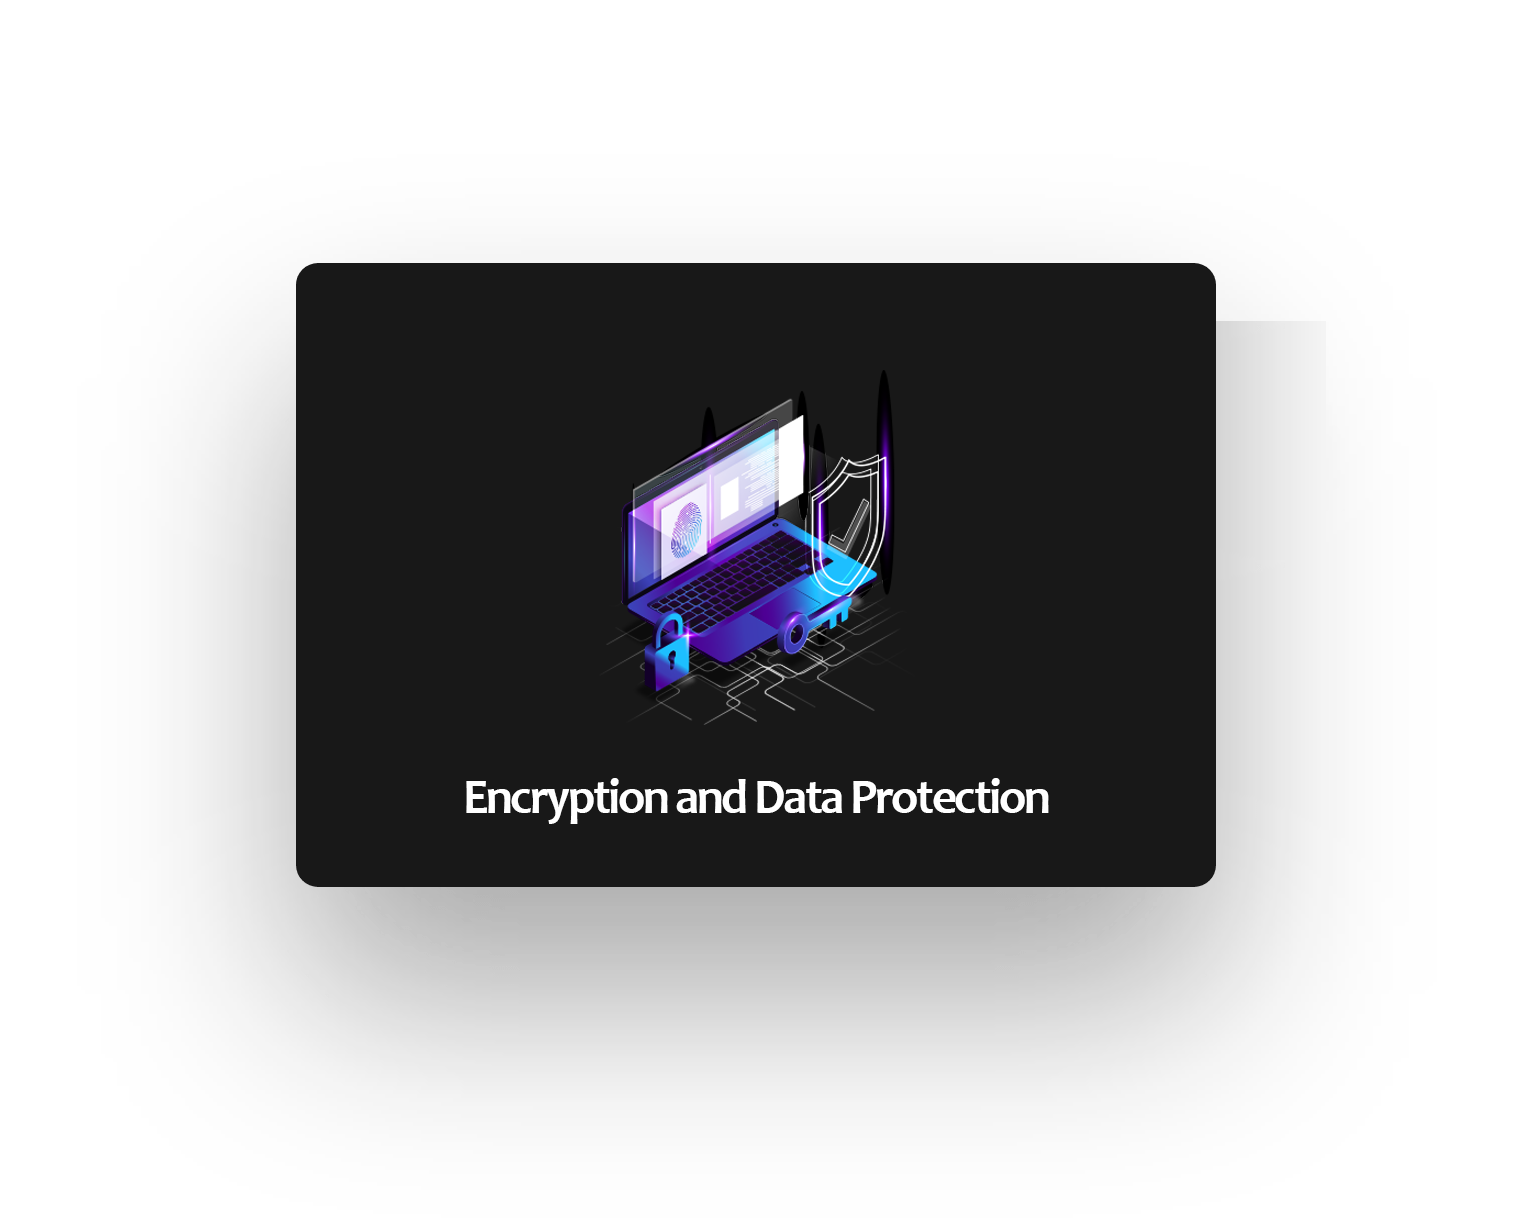 Encryption and Data Protection